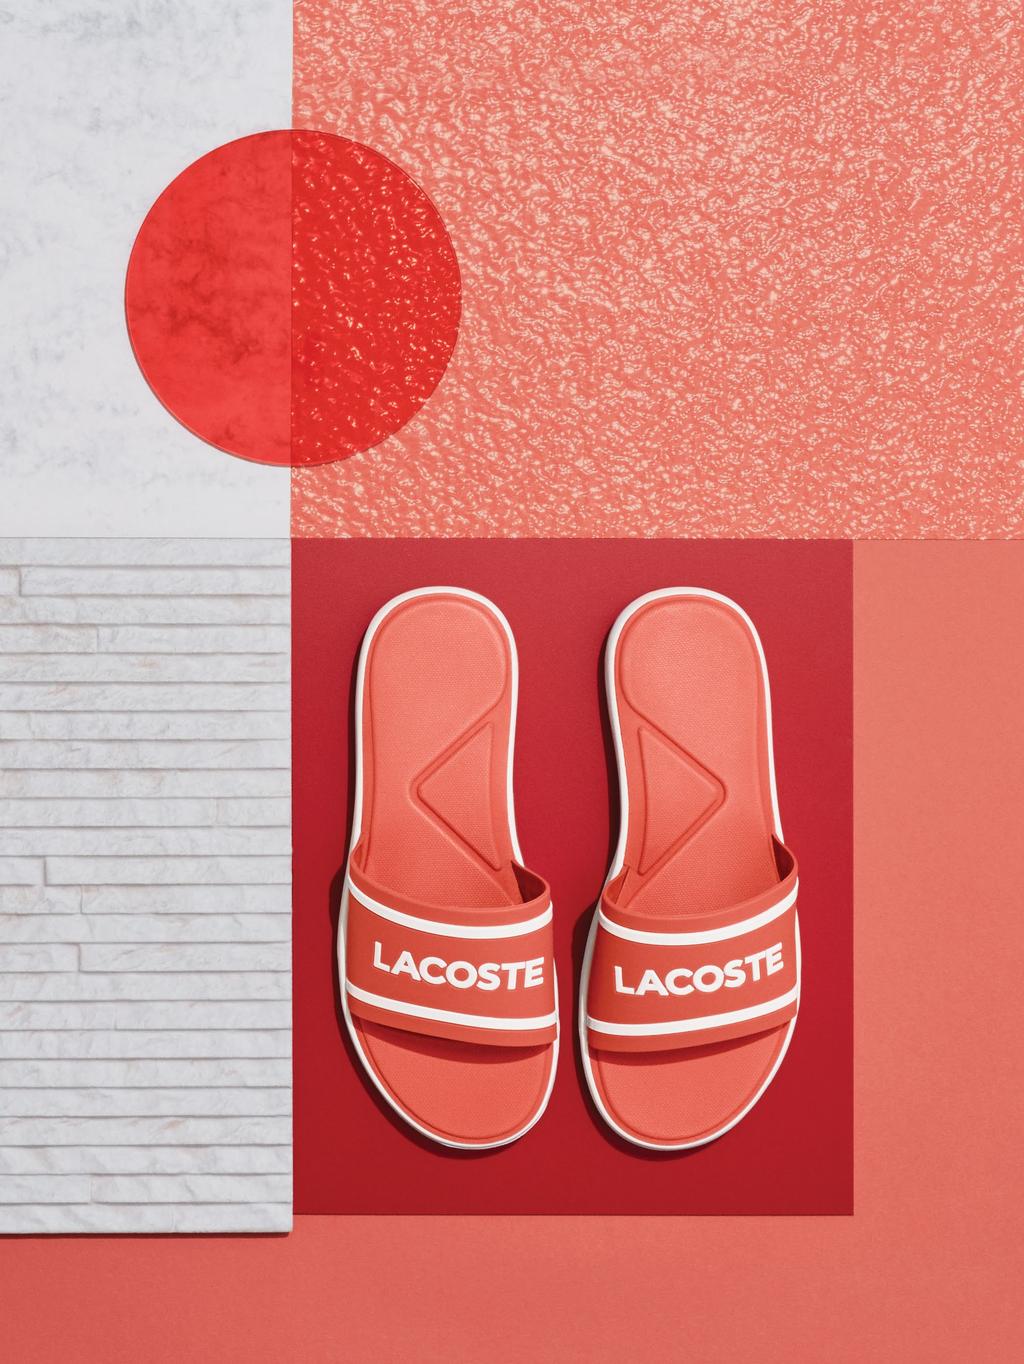 Introduction We are continuing our focused approach for Spring/Summer 2018, supporting our 3 key marketing objectives: Increase desirability & visibility of Lacoste within multi-brand stores by